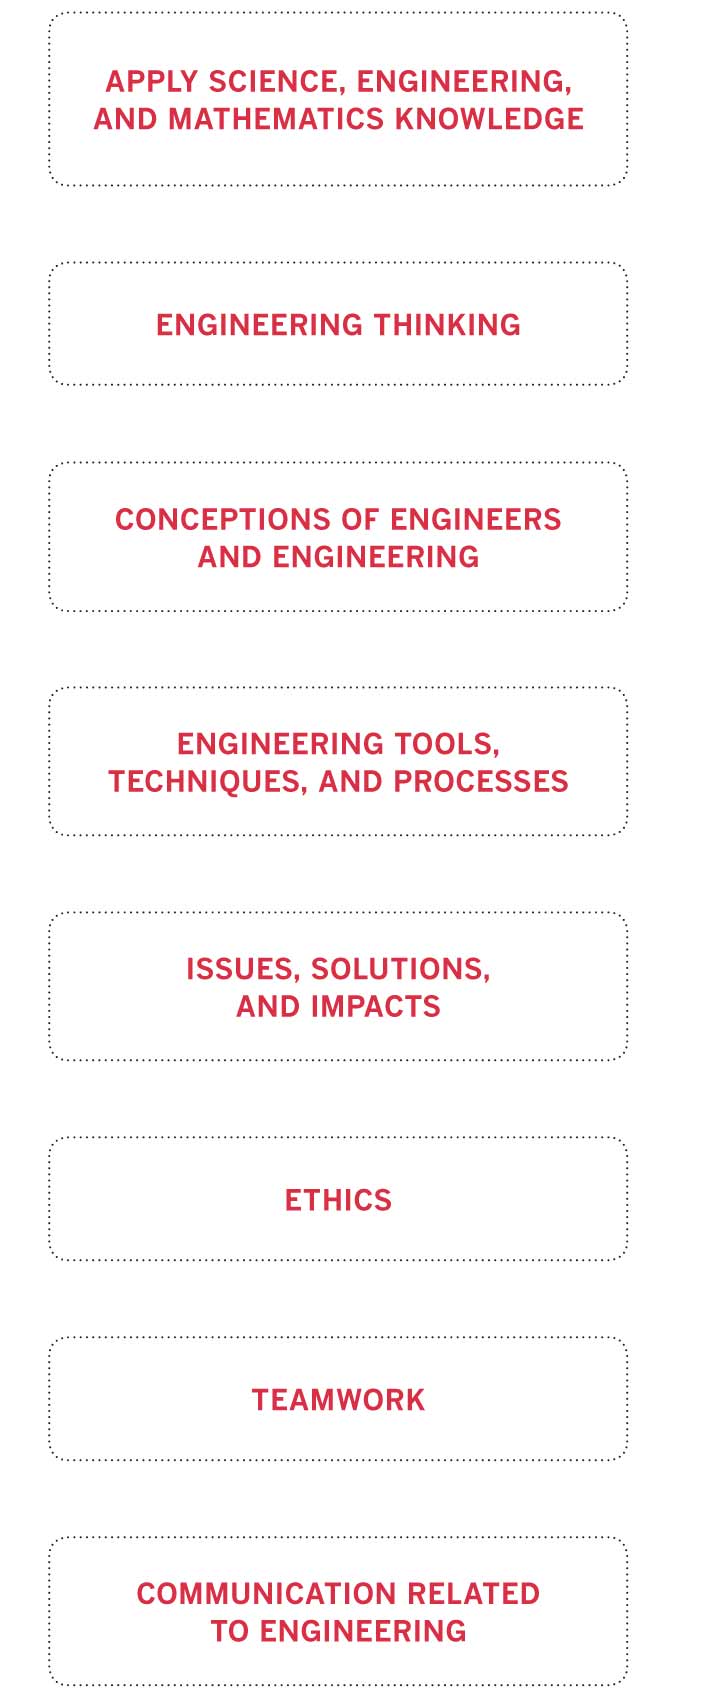 A Framework for Quality K-12 Engineering Education